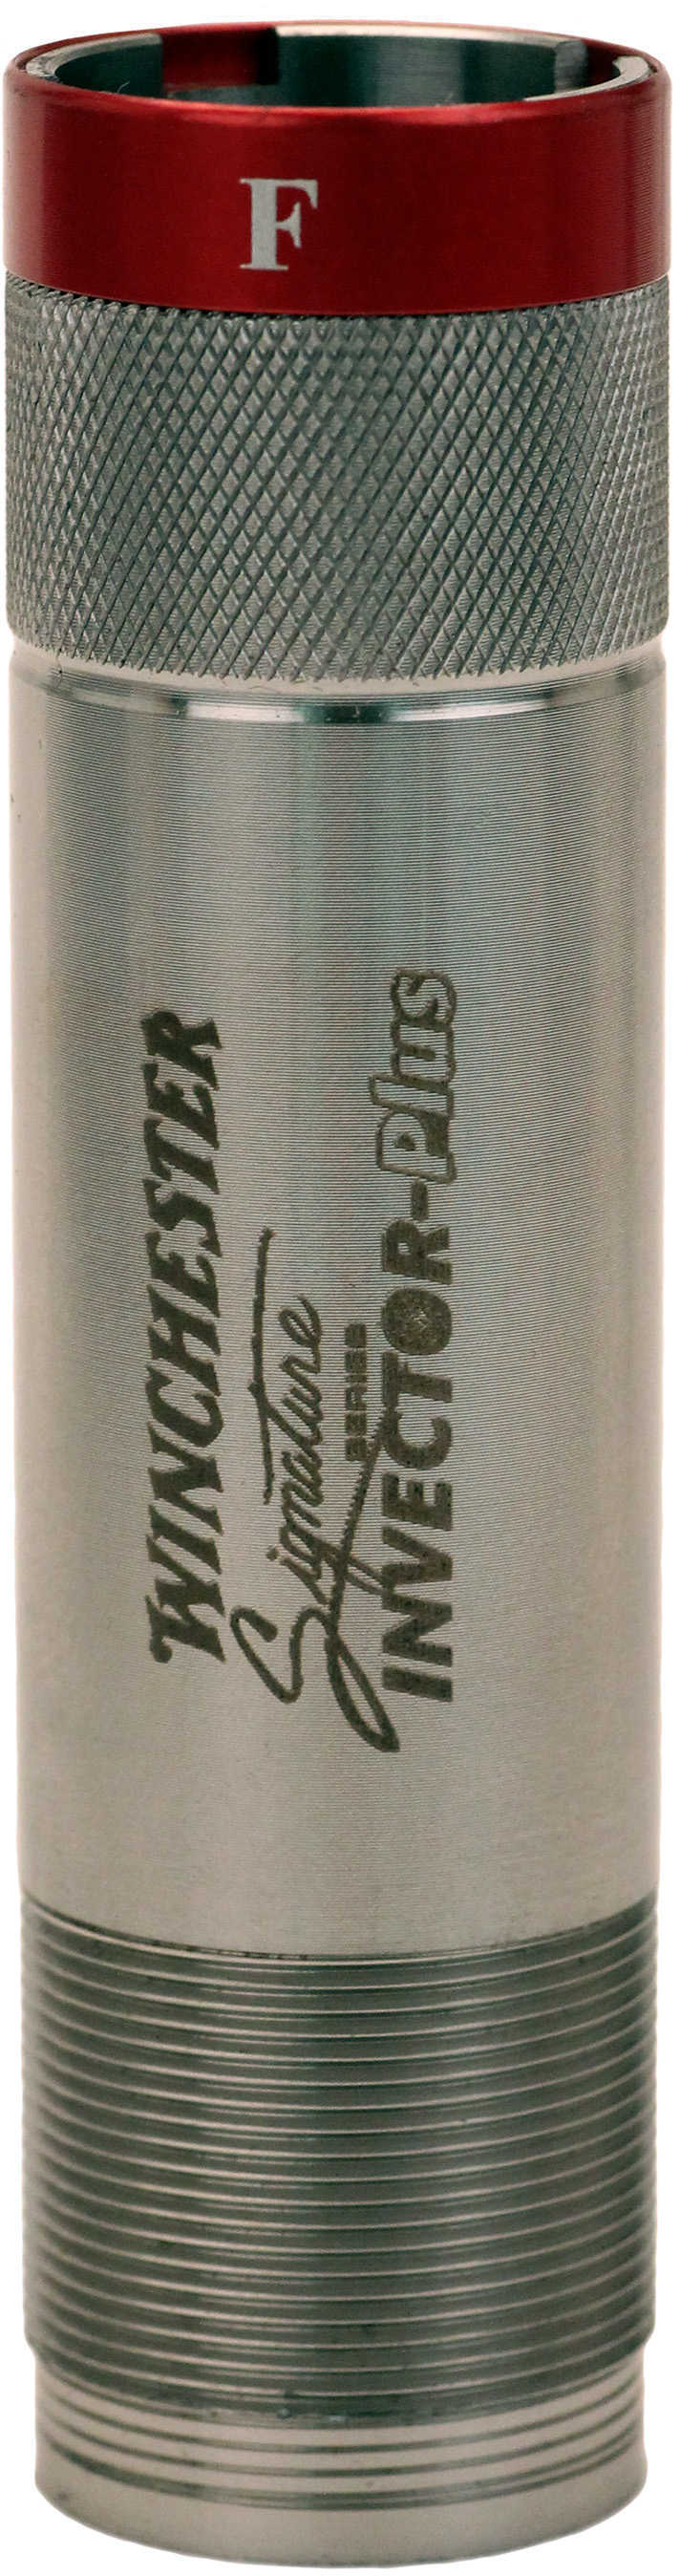 Winchester Signature Extended Invector Plus Choke Tube 12 Gauge Full 6130713